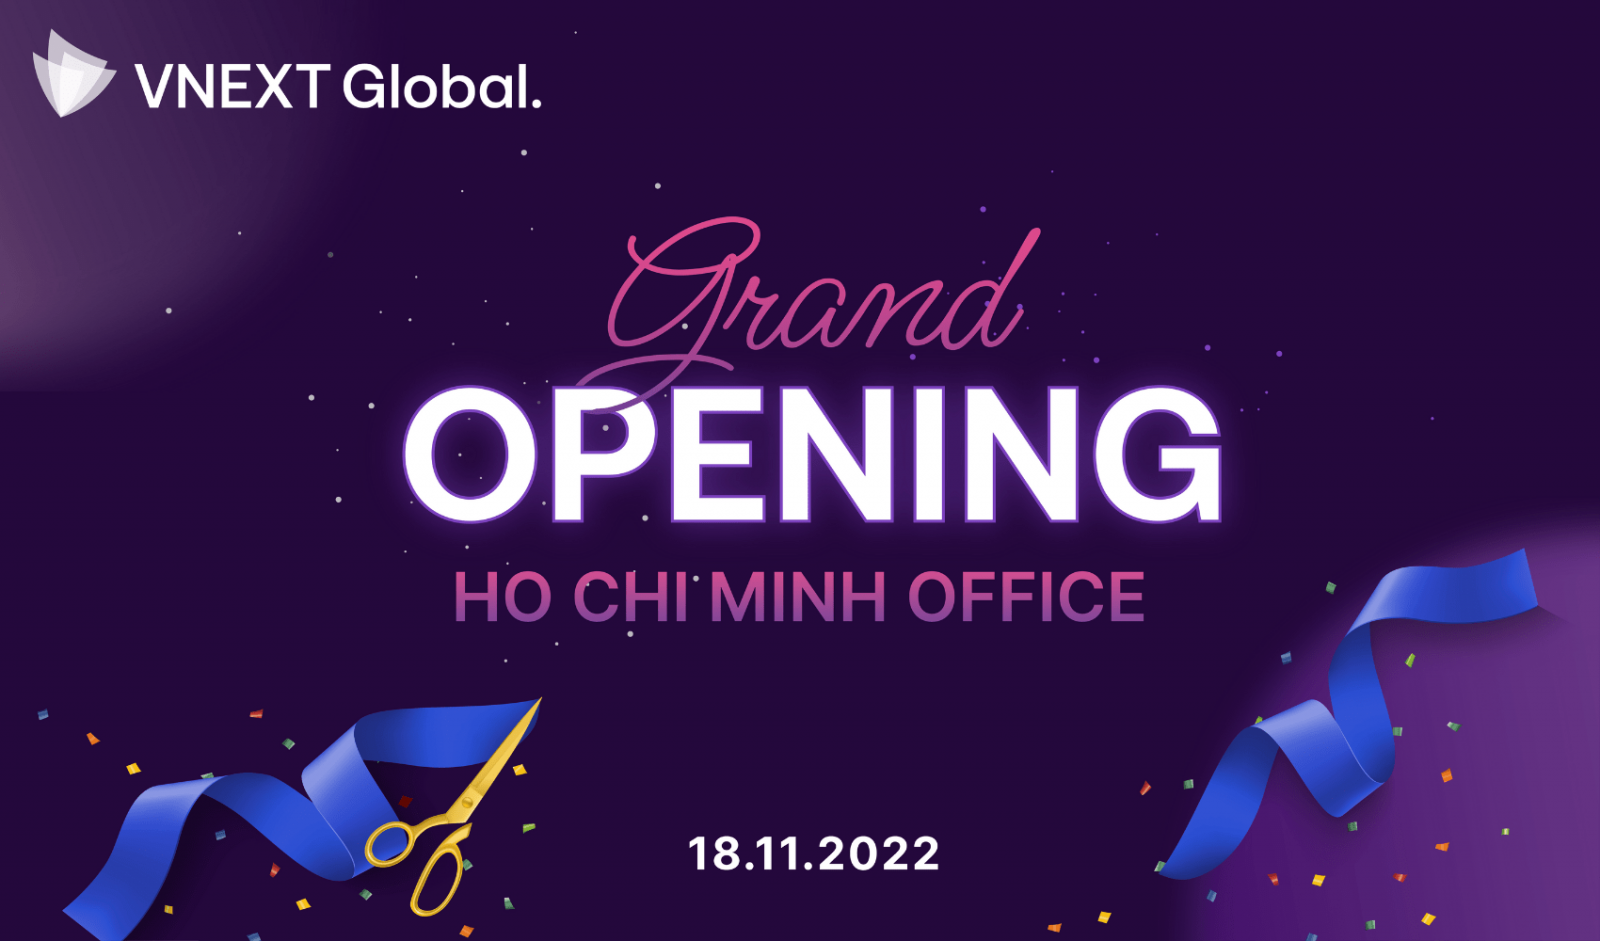 vnext global ho chi minh office grand opening